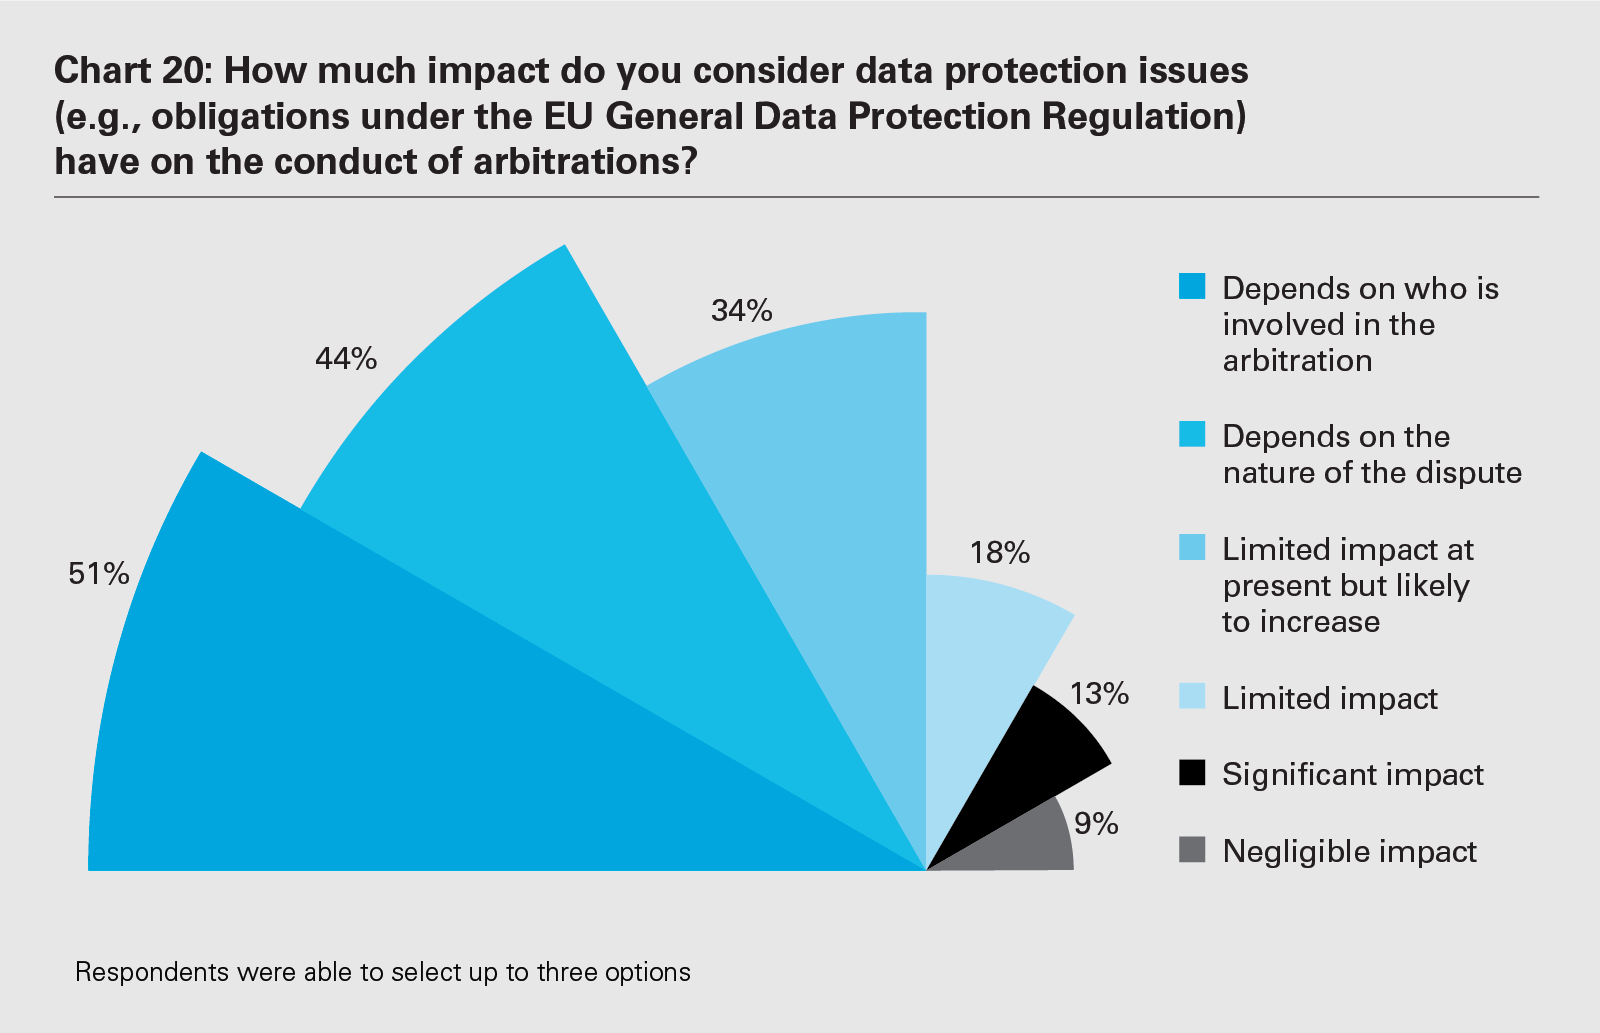 Chart 20: How much impact do you consider data protection issues (e.g., obligations under the EU General Data Protection Regulation) have on the conduct of arbitrations?